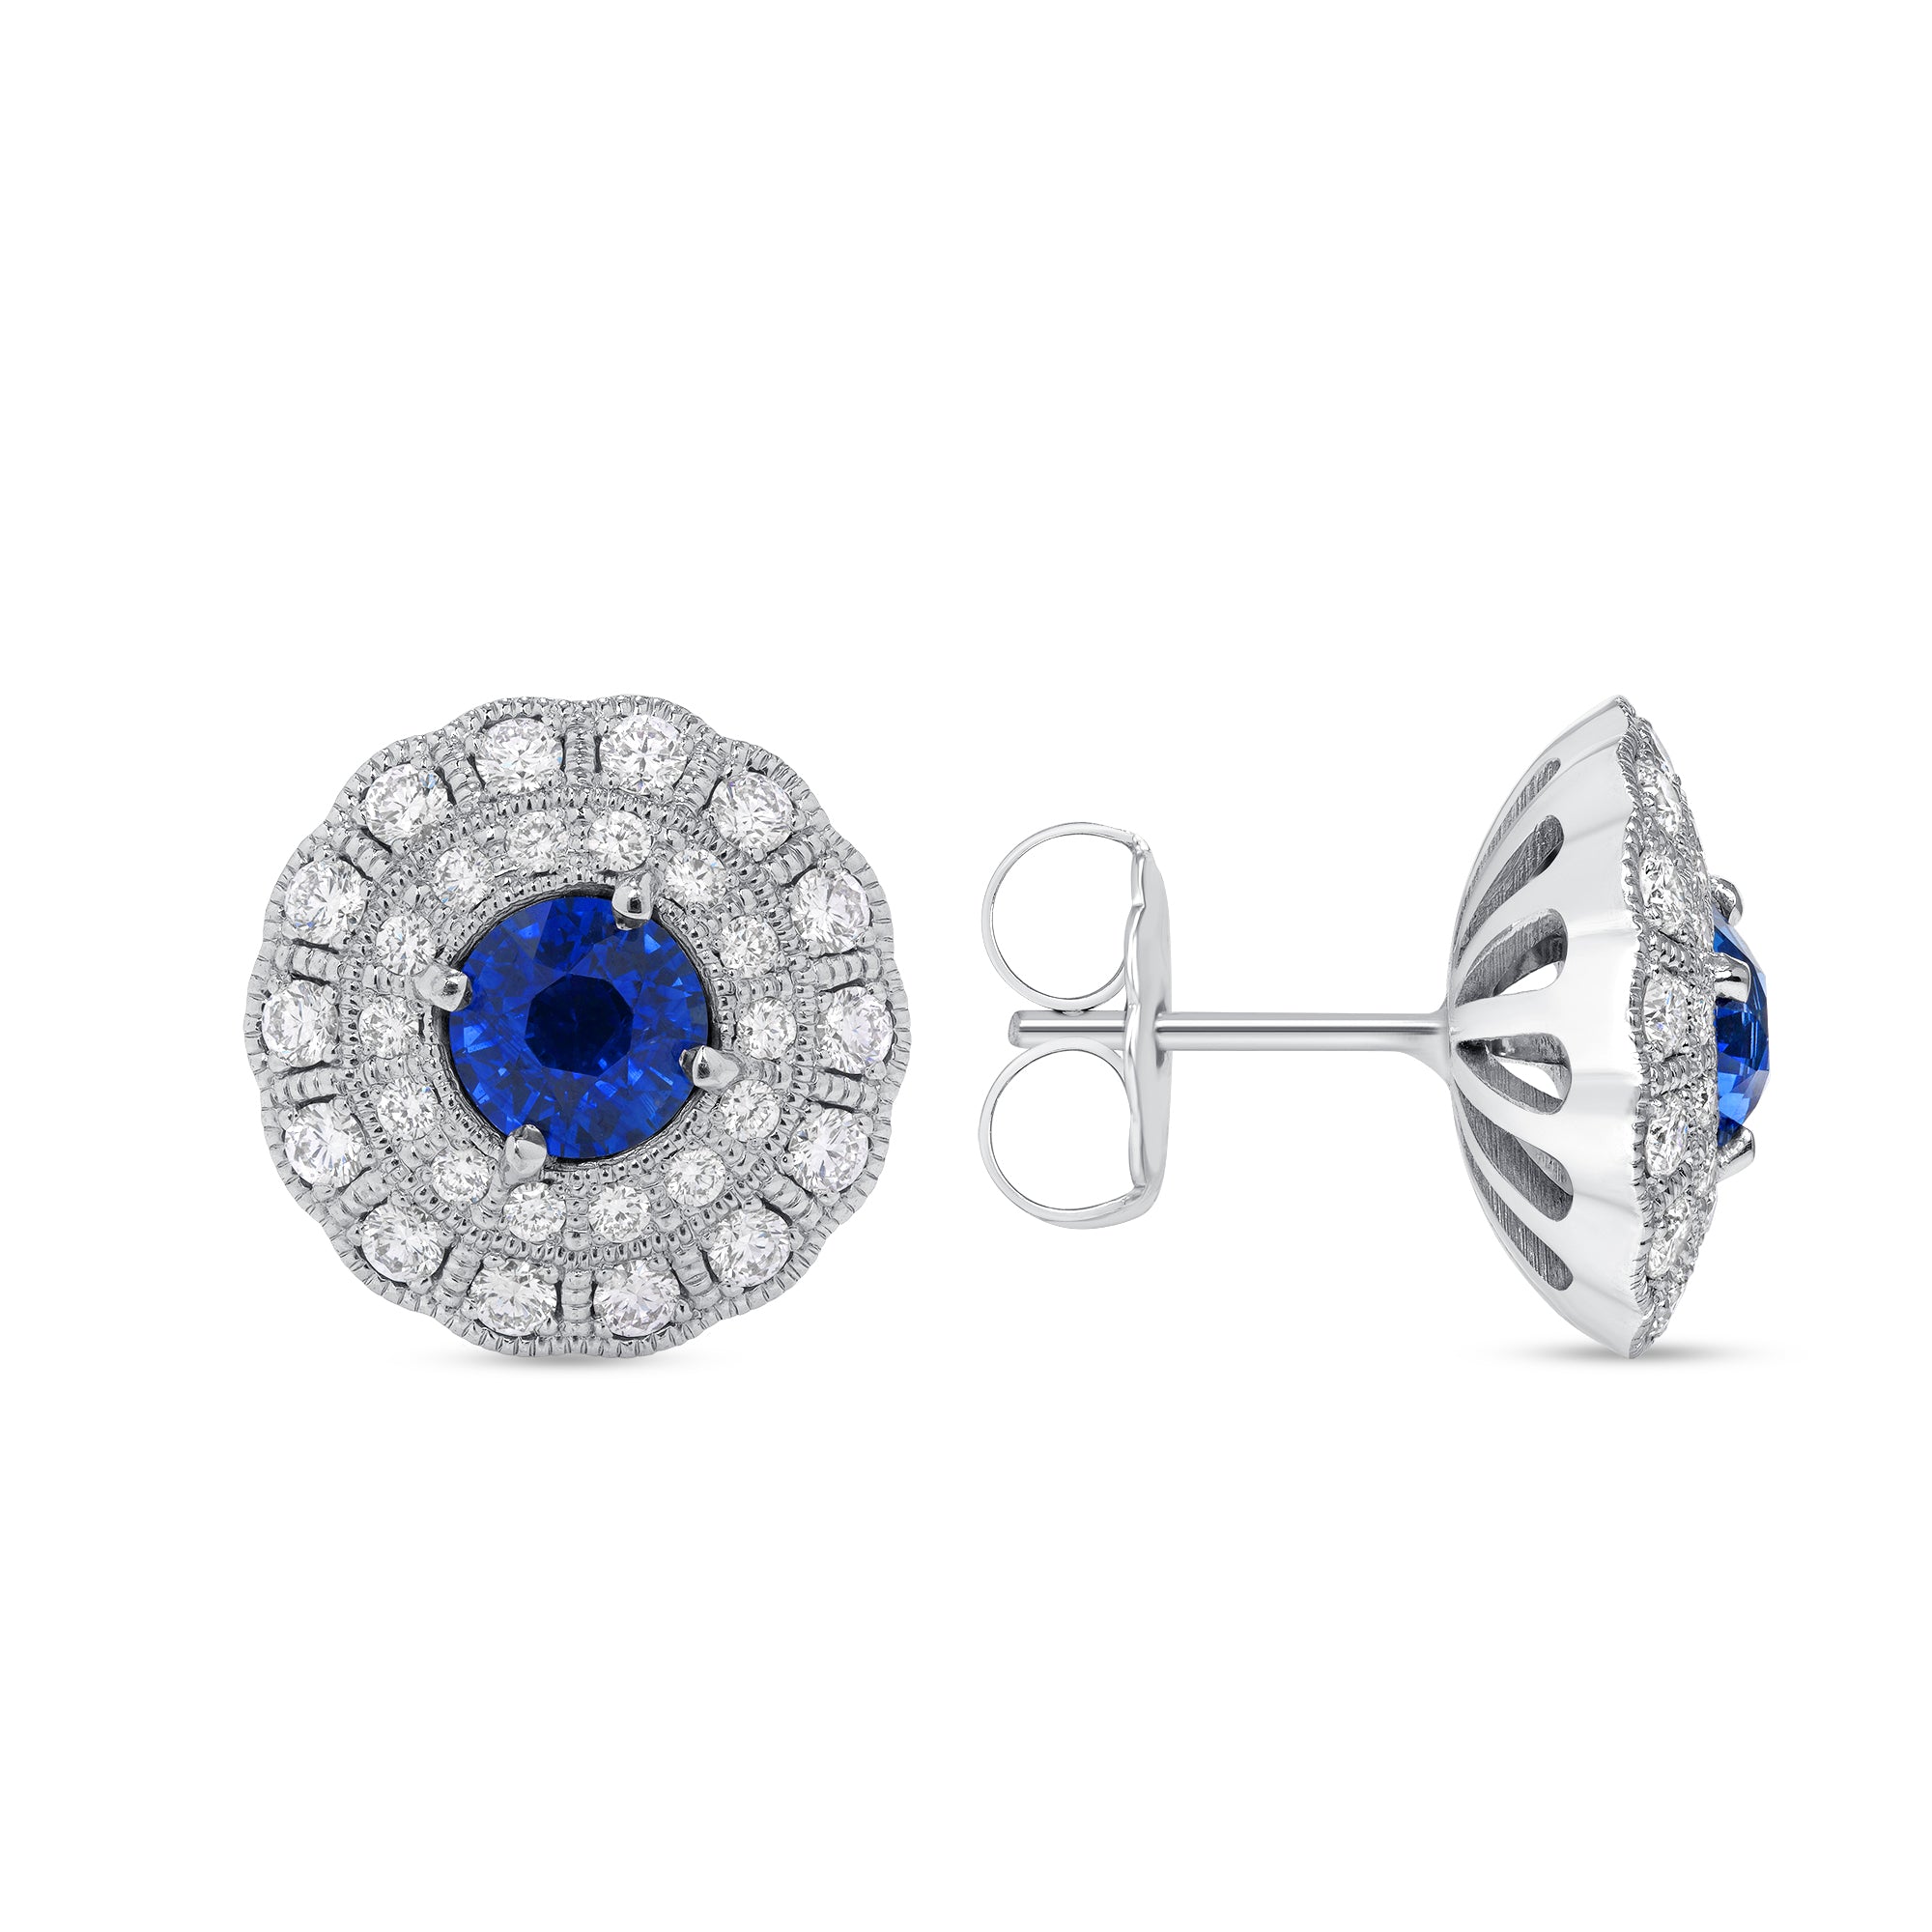 Blue Sapphire And Diamond Halo Earrings In 18 karat white gold